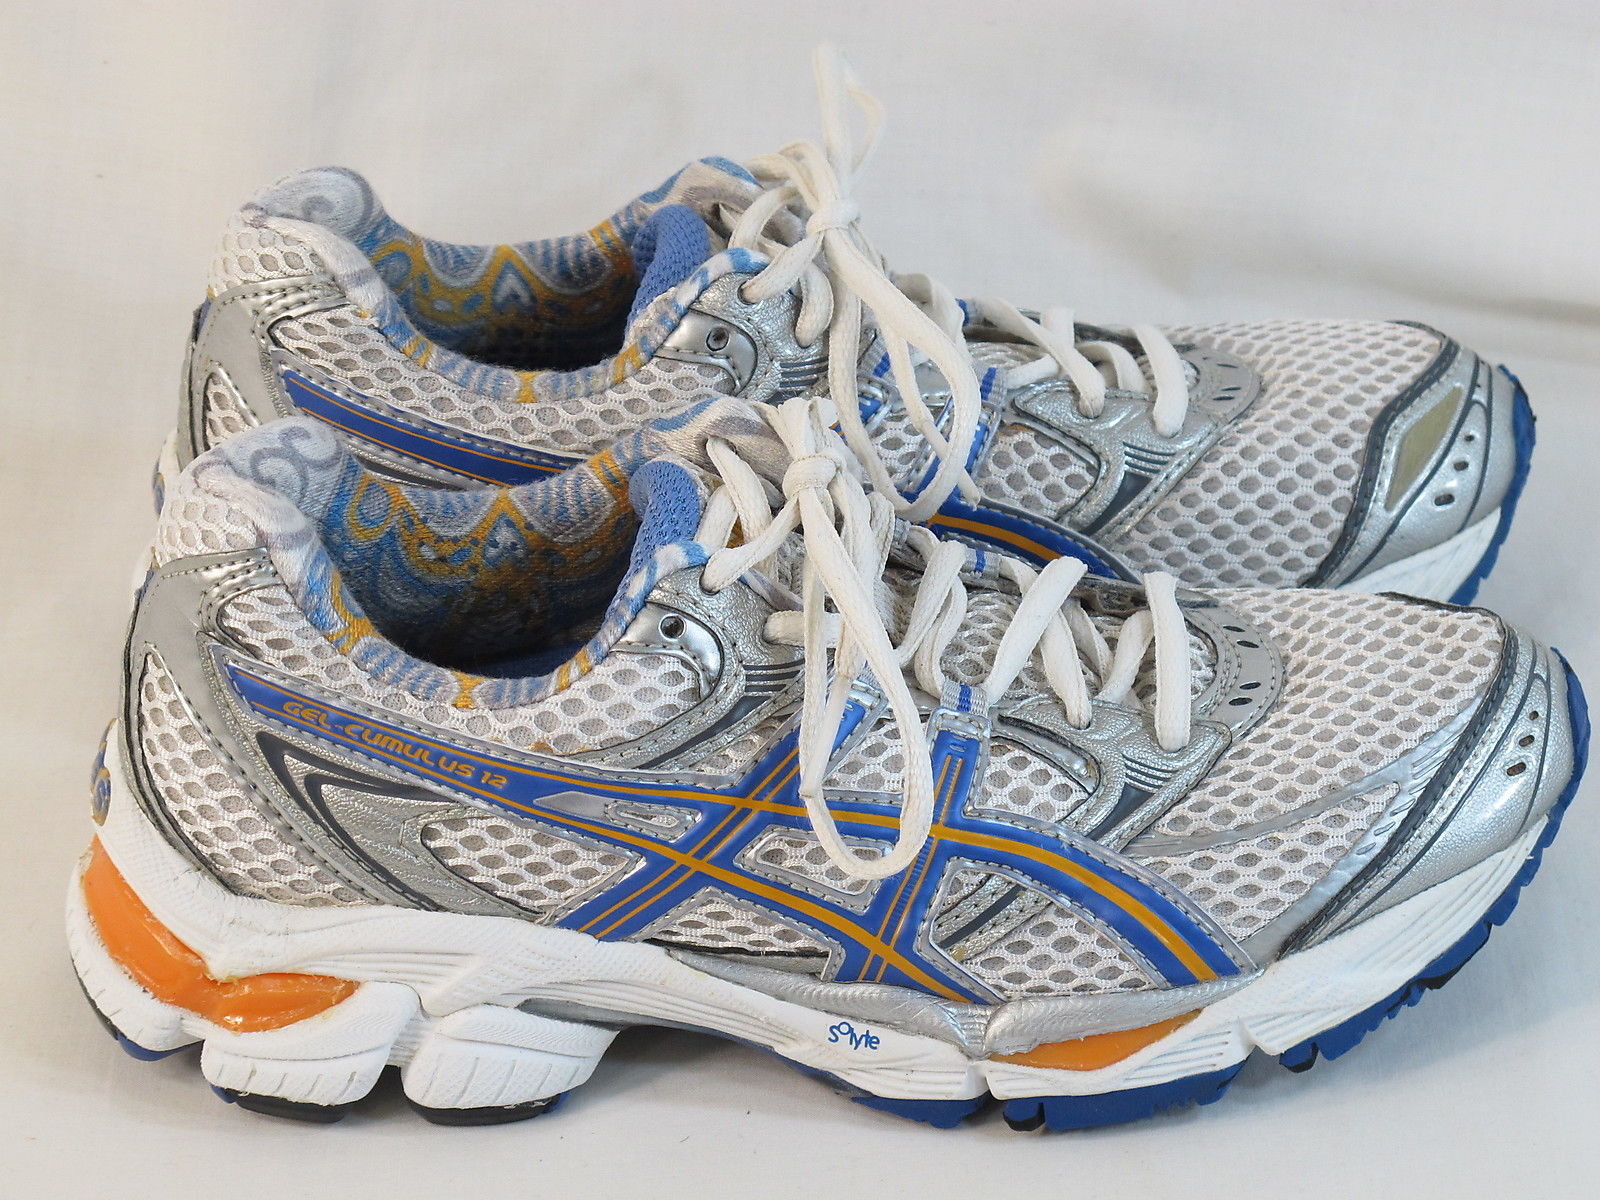 asics women's size 12 shoes, OFF 78%,Buy!